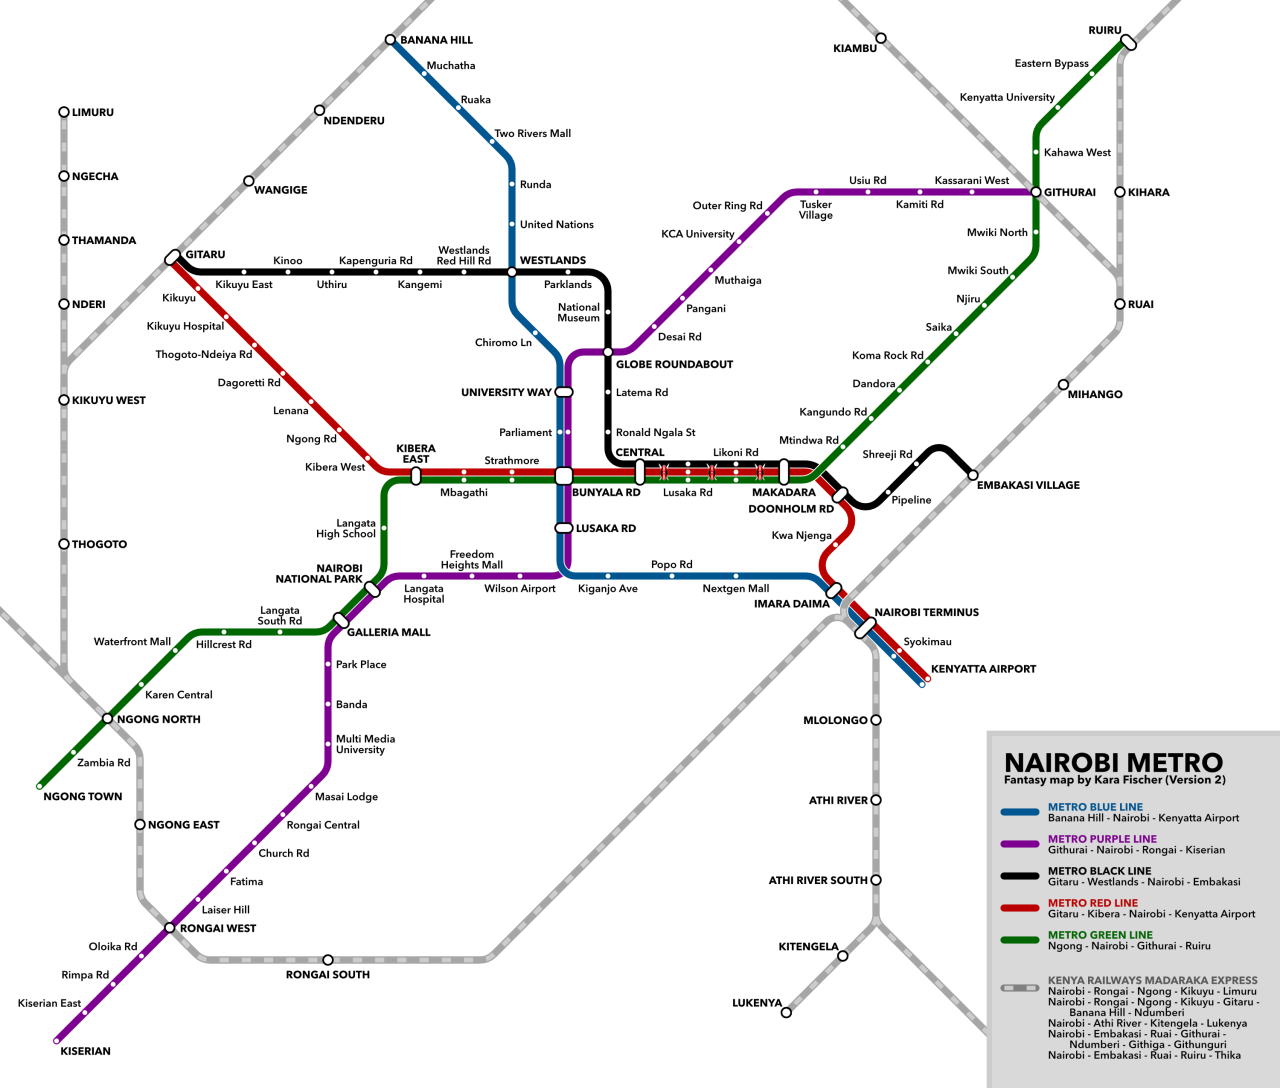 Nairobi Metro Fantasy Map, Version 2I definitely didn’t expect to have one of my maps go viral in Nairobi, but I’m very much grateful for Mbithi Masya’s showcase of my map! I’ve gotten a lot of feedback from Nairobians, and I’ve updated the map to...